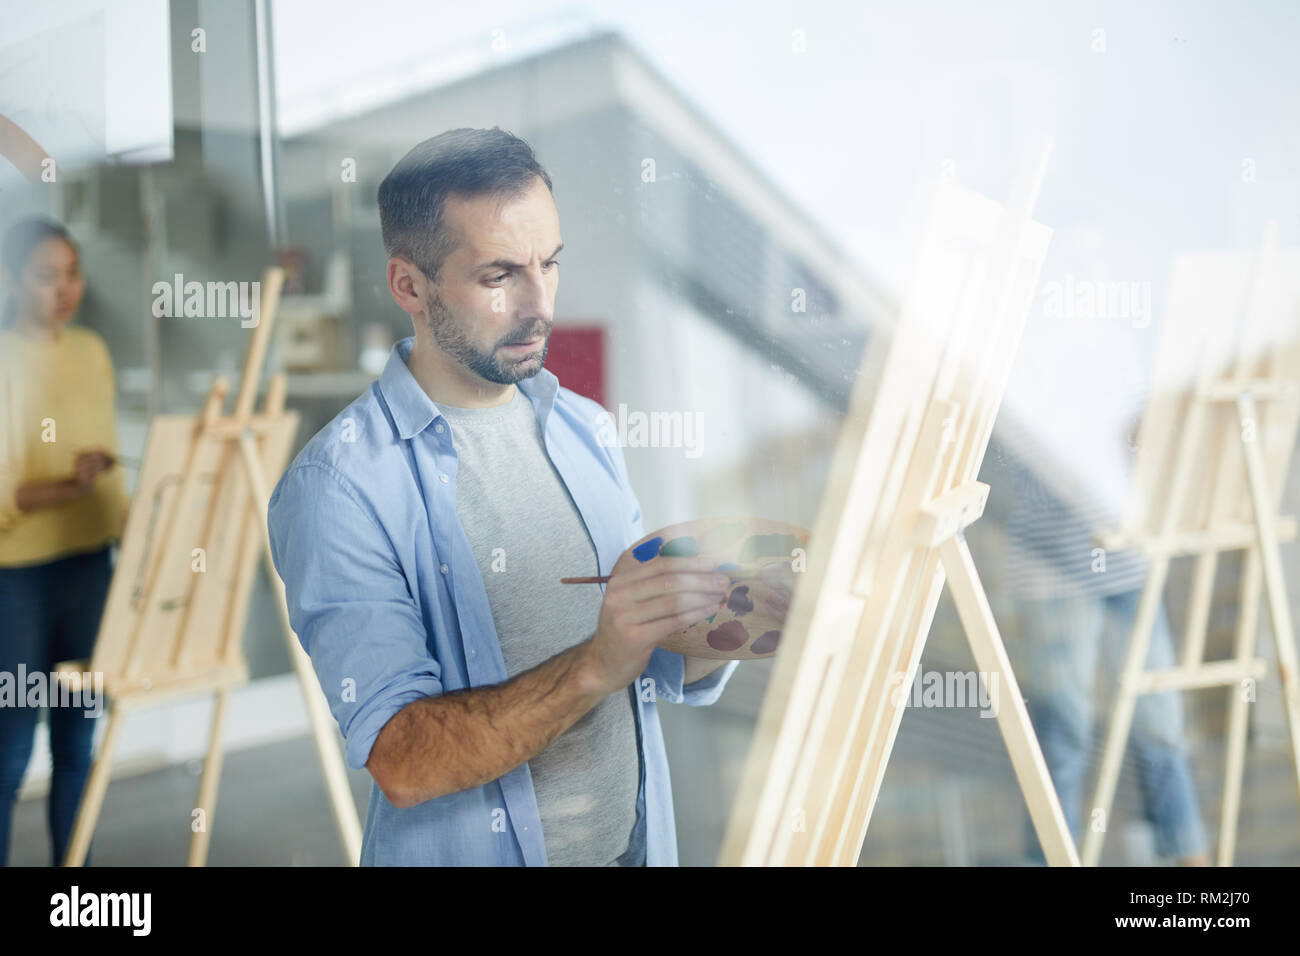 Working over painting Stock Photo